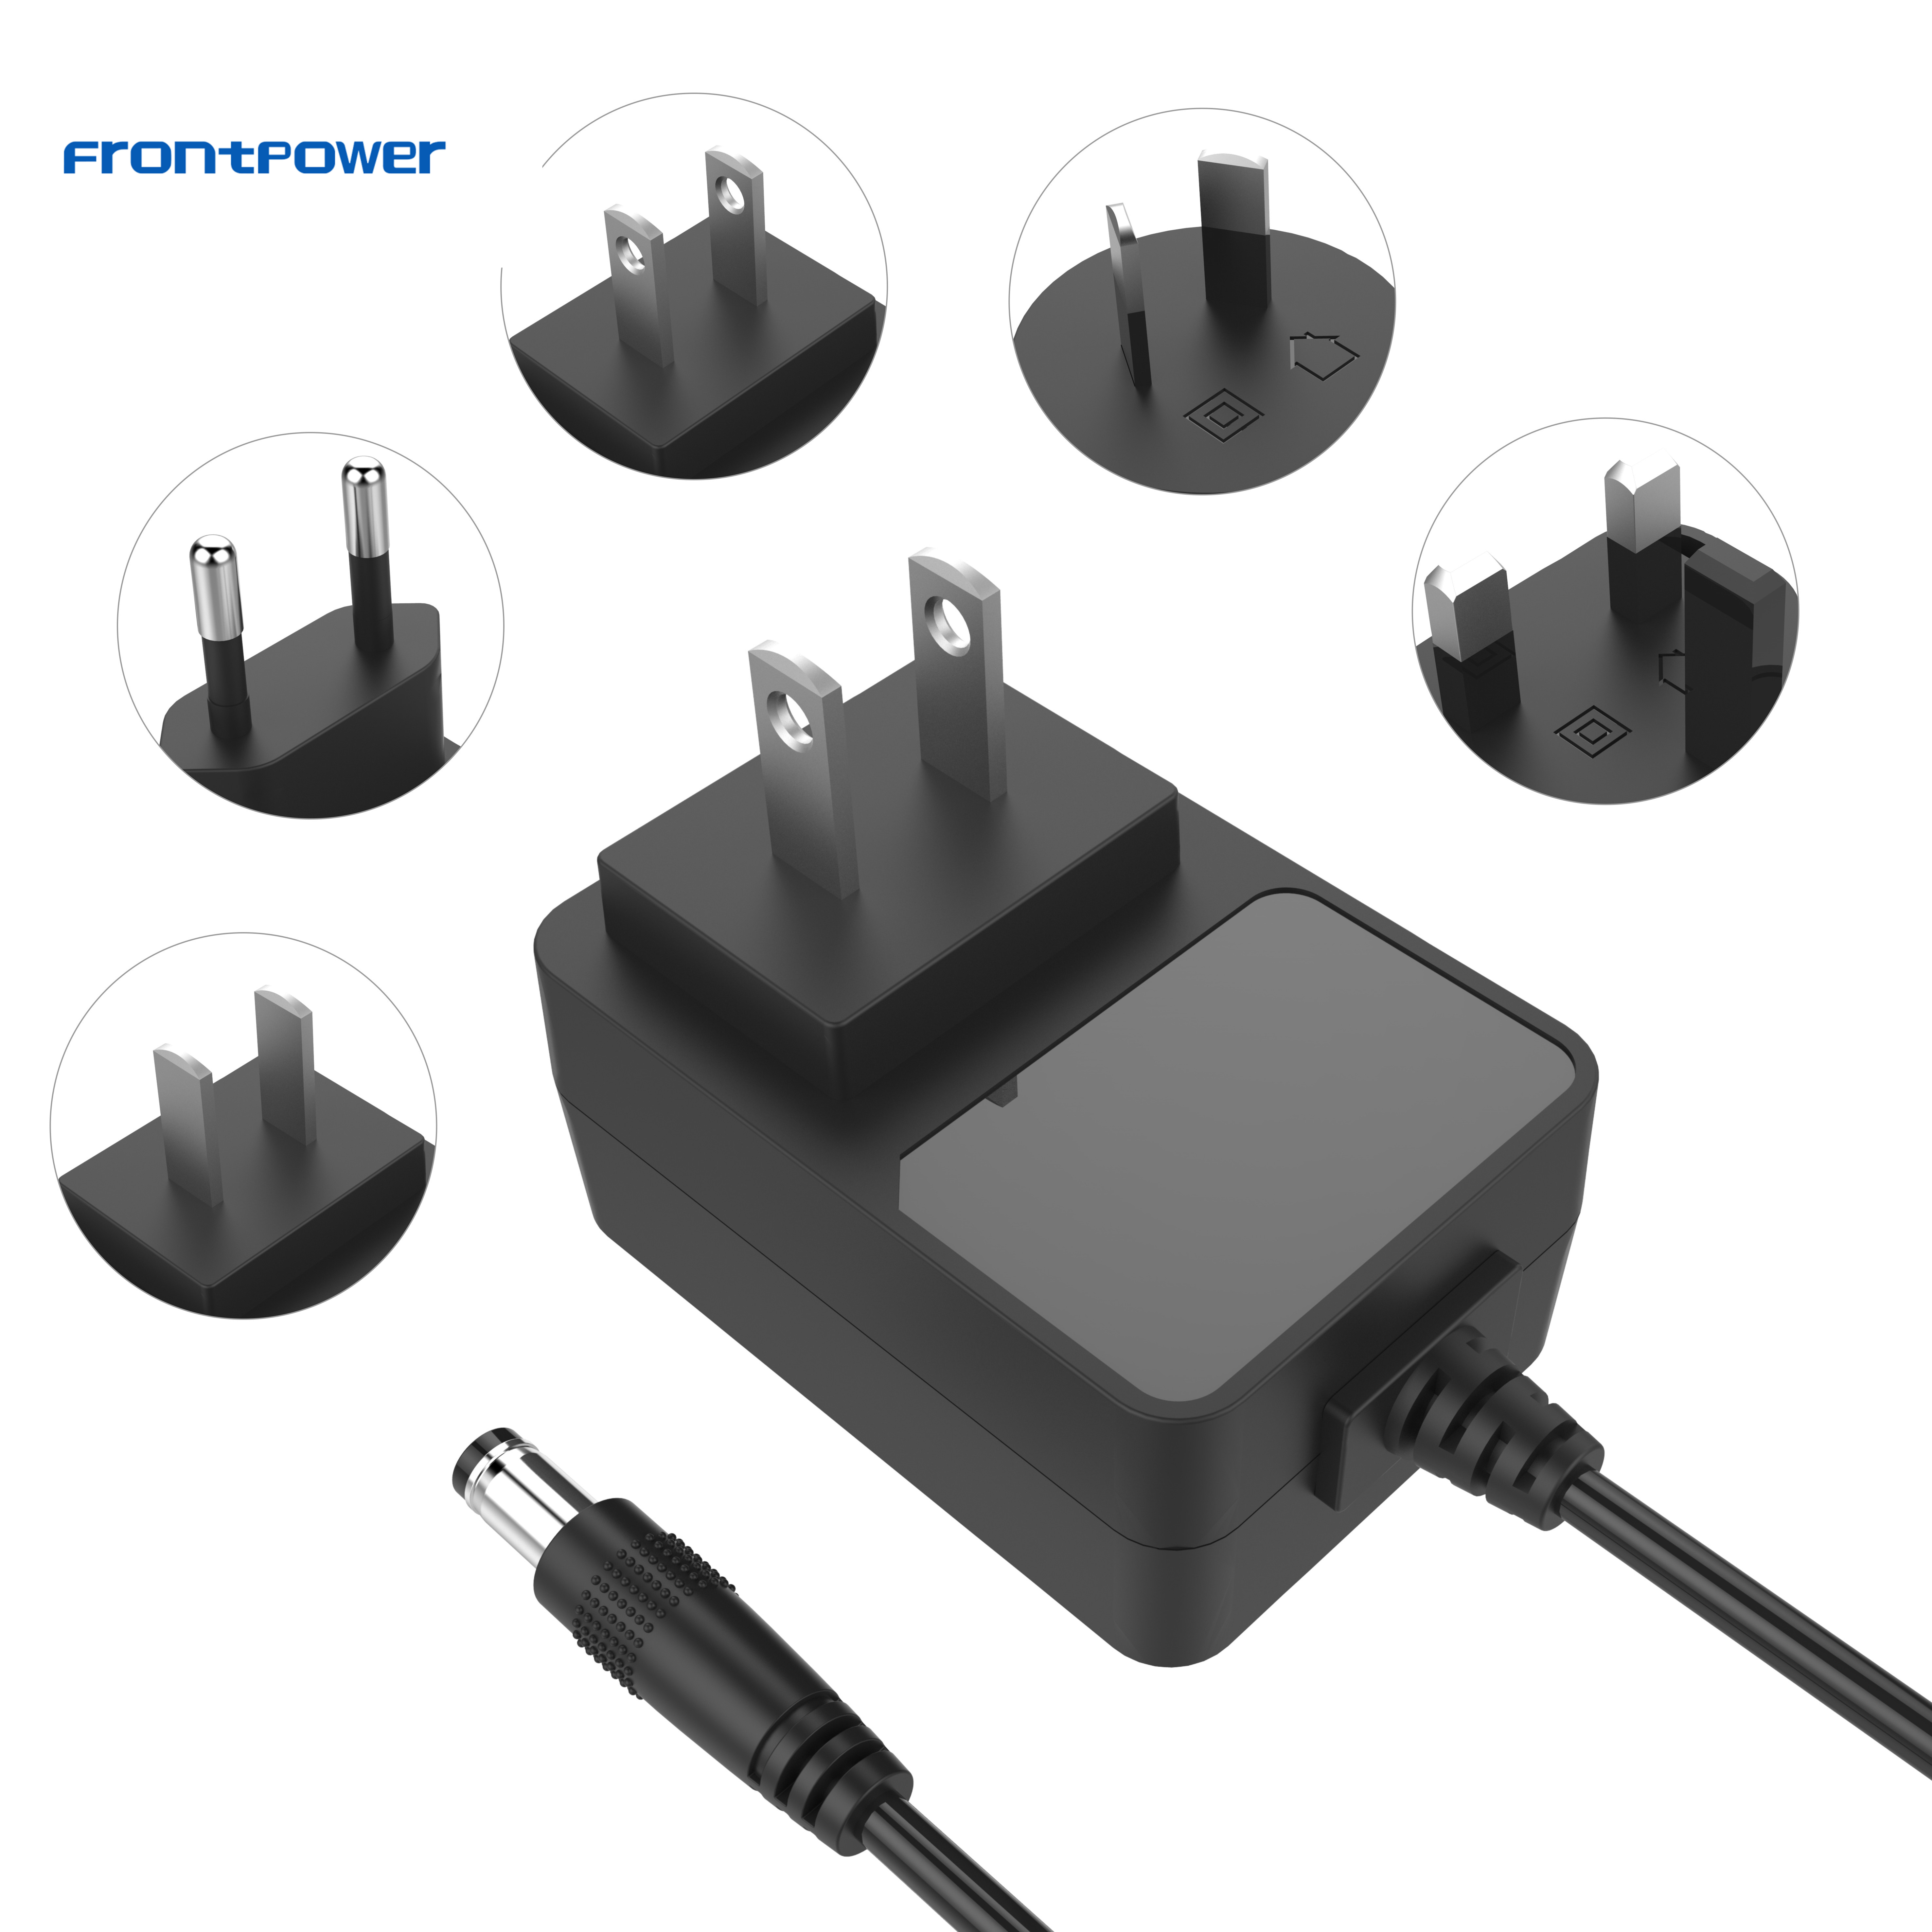 adaptor wall plug power supply adapter 5v 2.5a with EN62368/61558/60601 ETL1310 for mobile phone